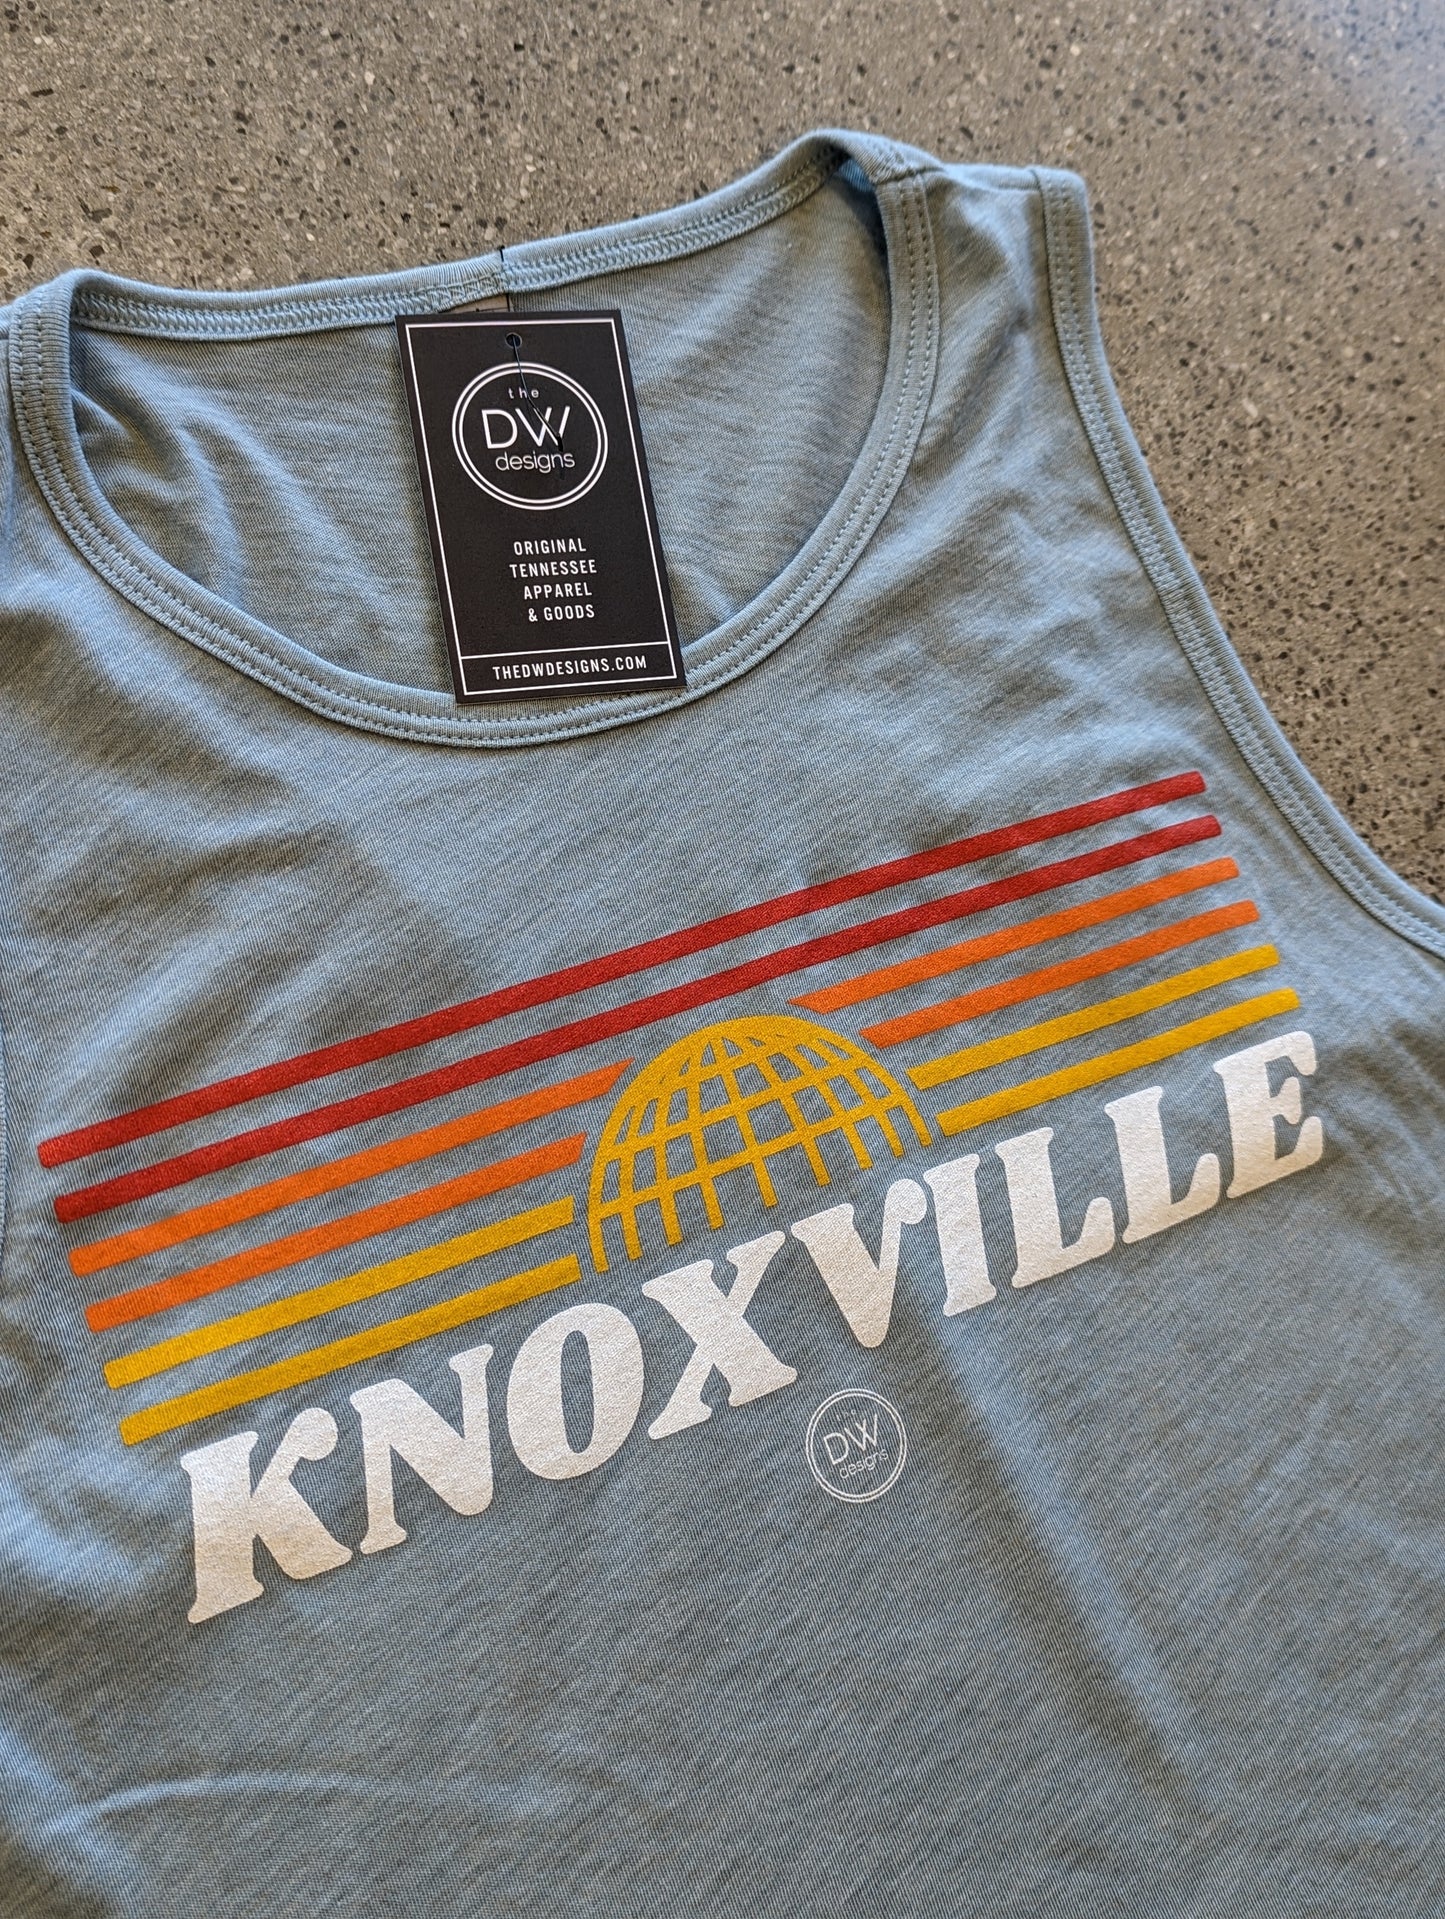 The Knoxville Sunset Women's Crop Tank